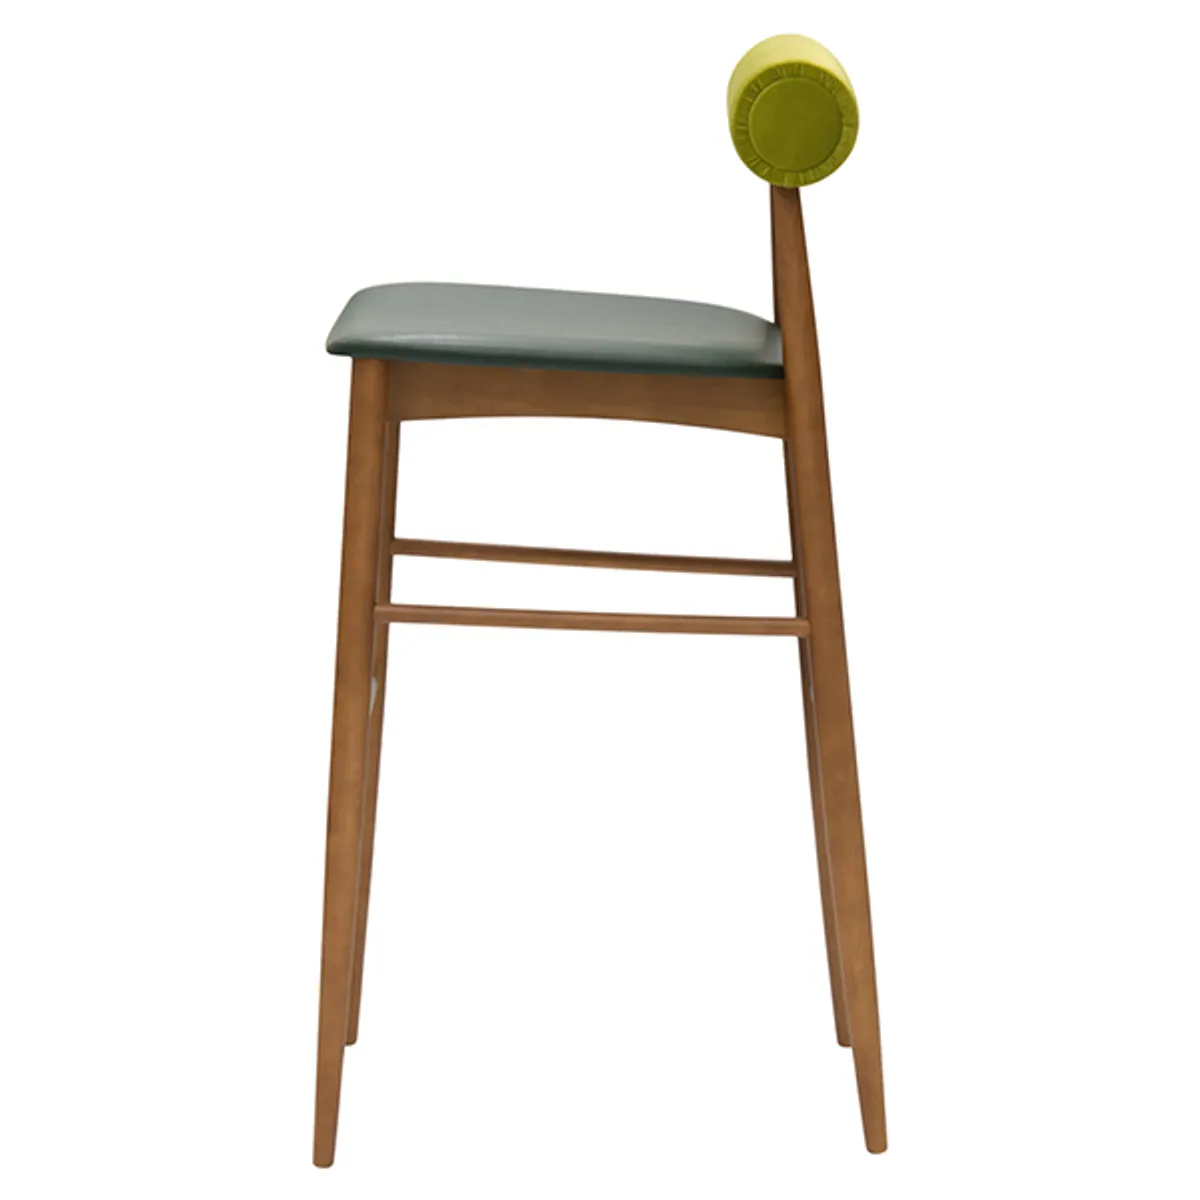 Rolla Bar Stool Quirky Furniture For Hospitality Inside Out Contracts 1